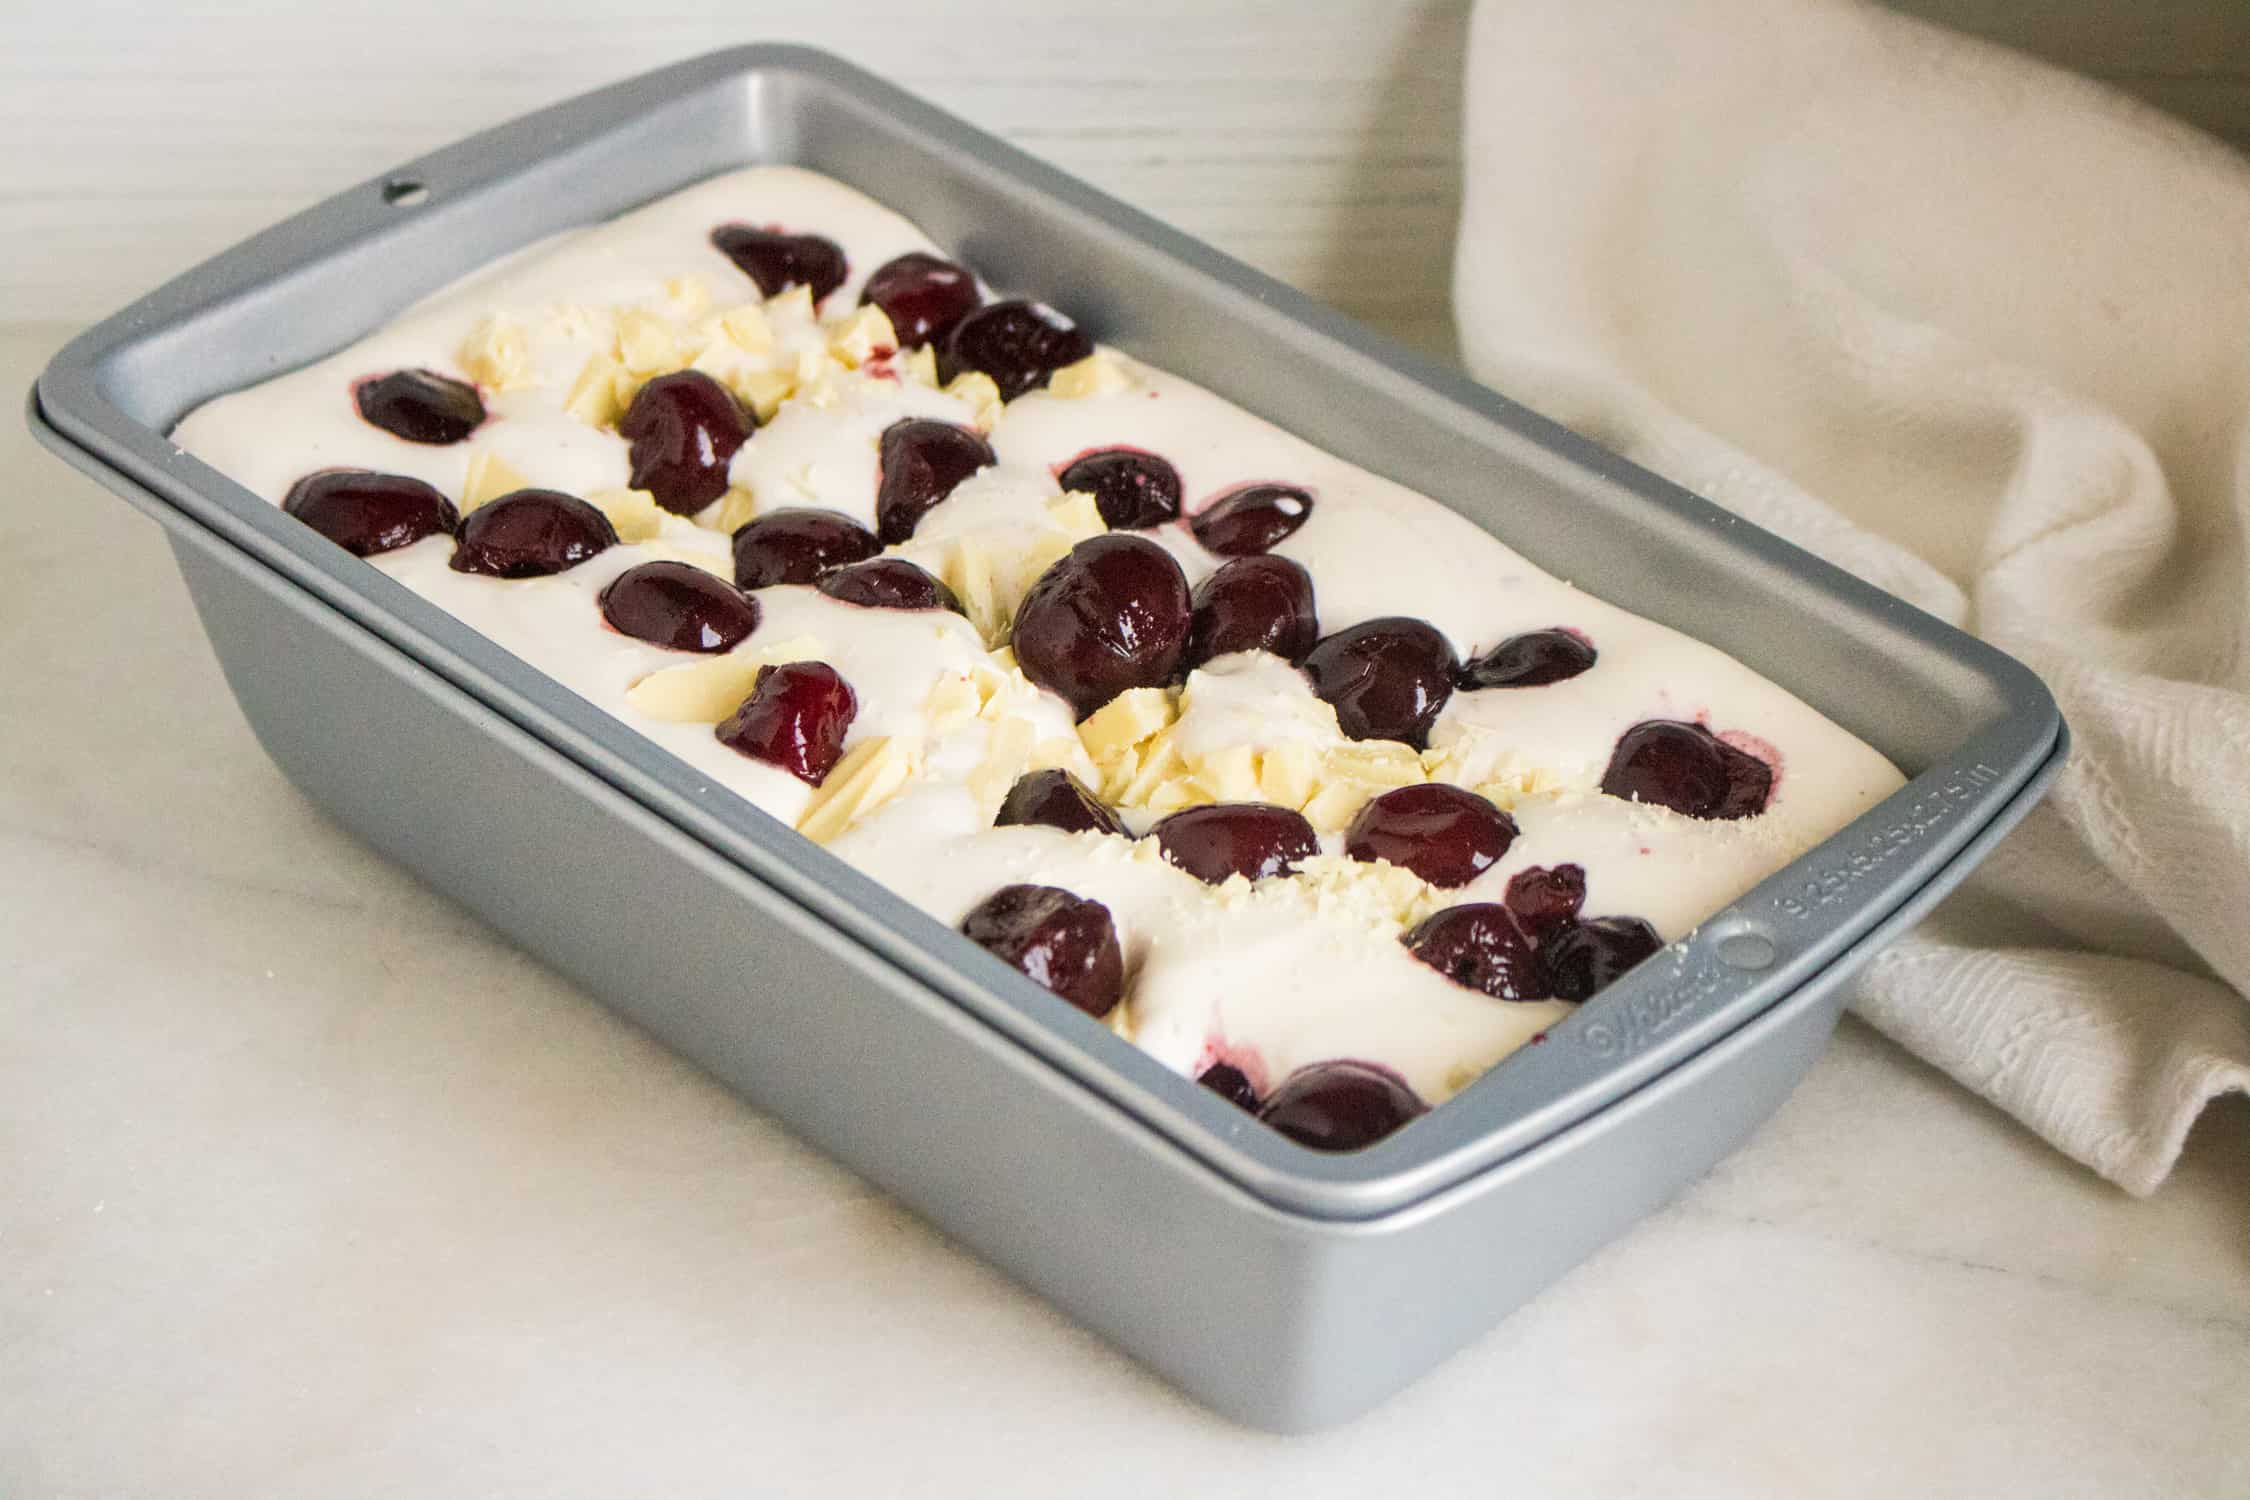 metal loaf pan filled with the no churn ice cream mixture and topped with black cherries and white chocolate chunks